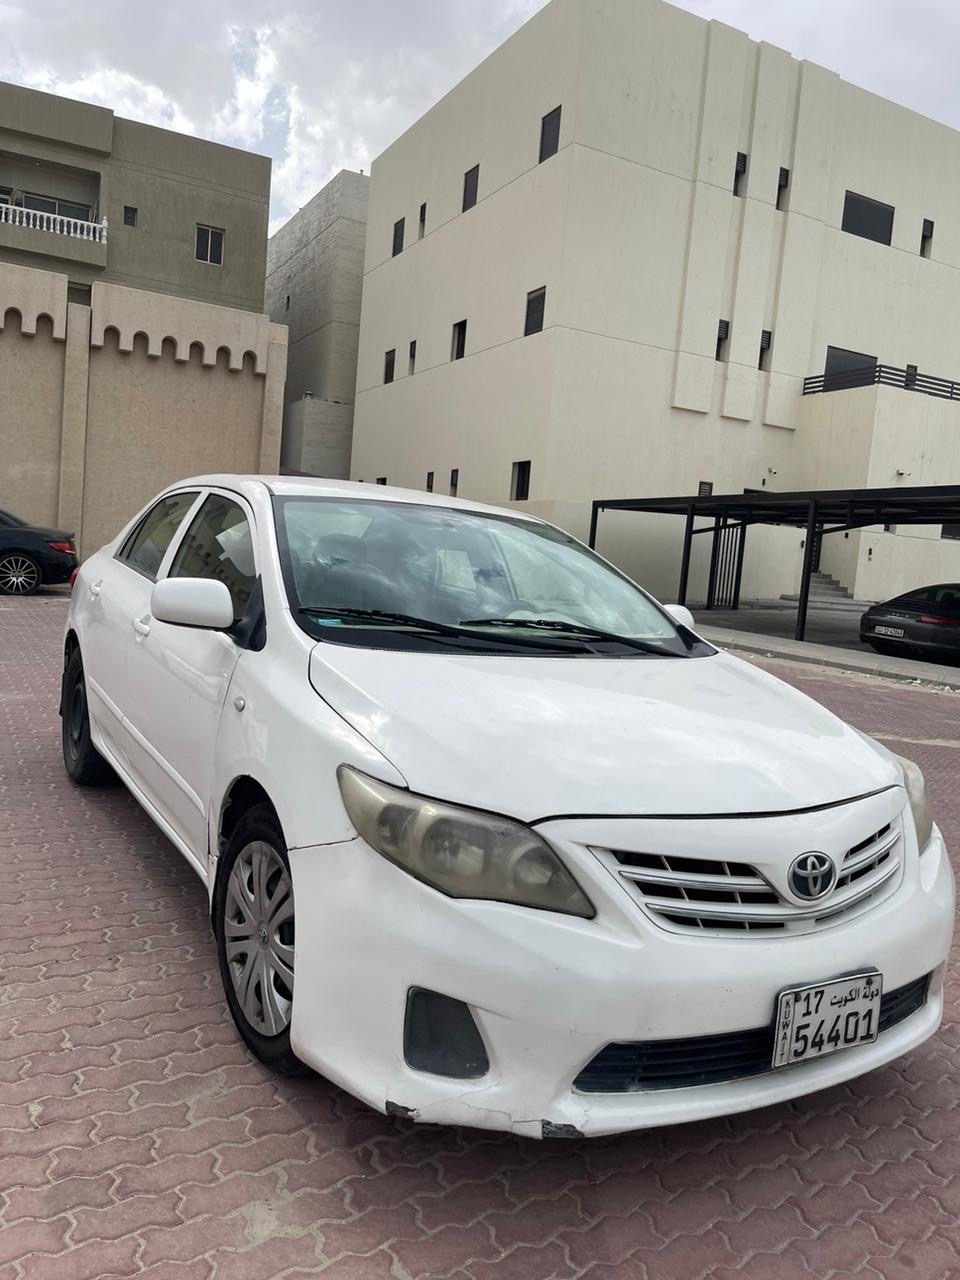 Corolla 2013 white good condition car available for sale 